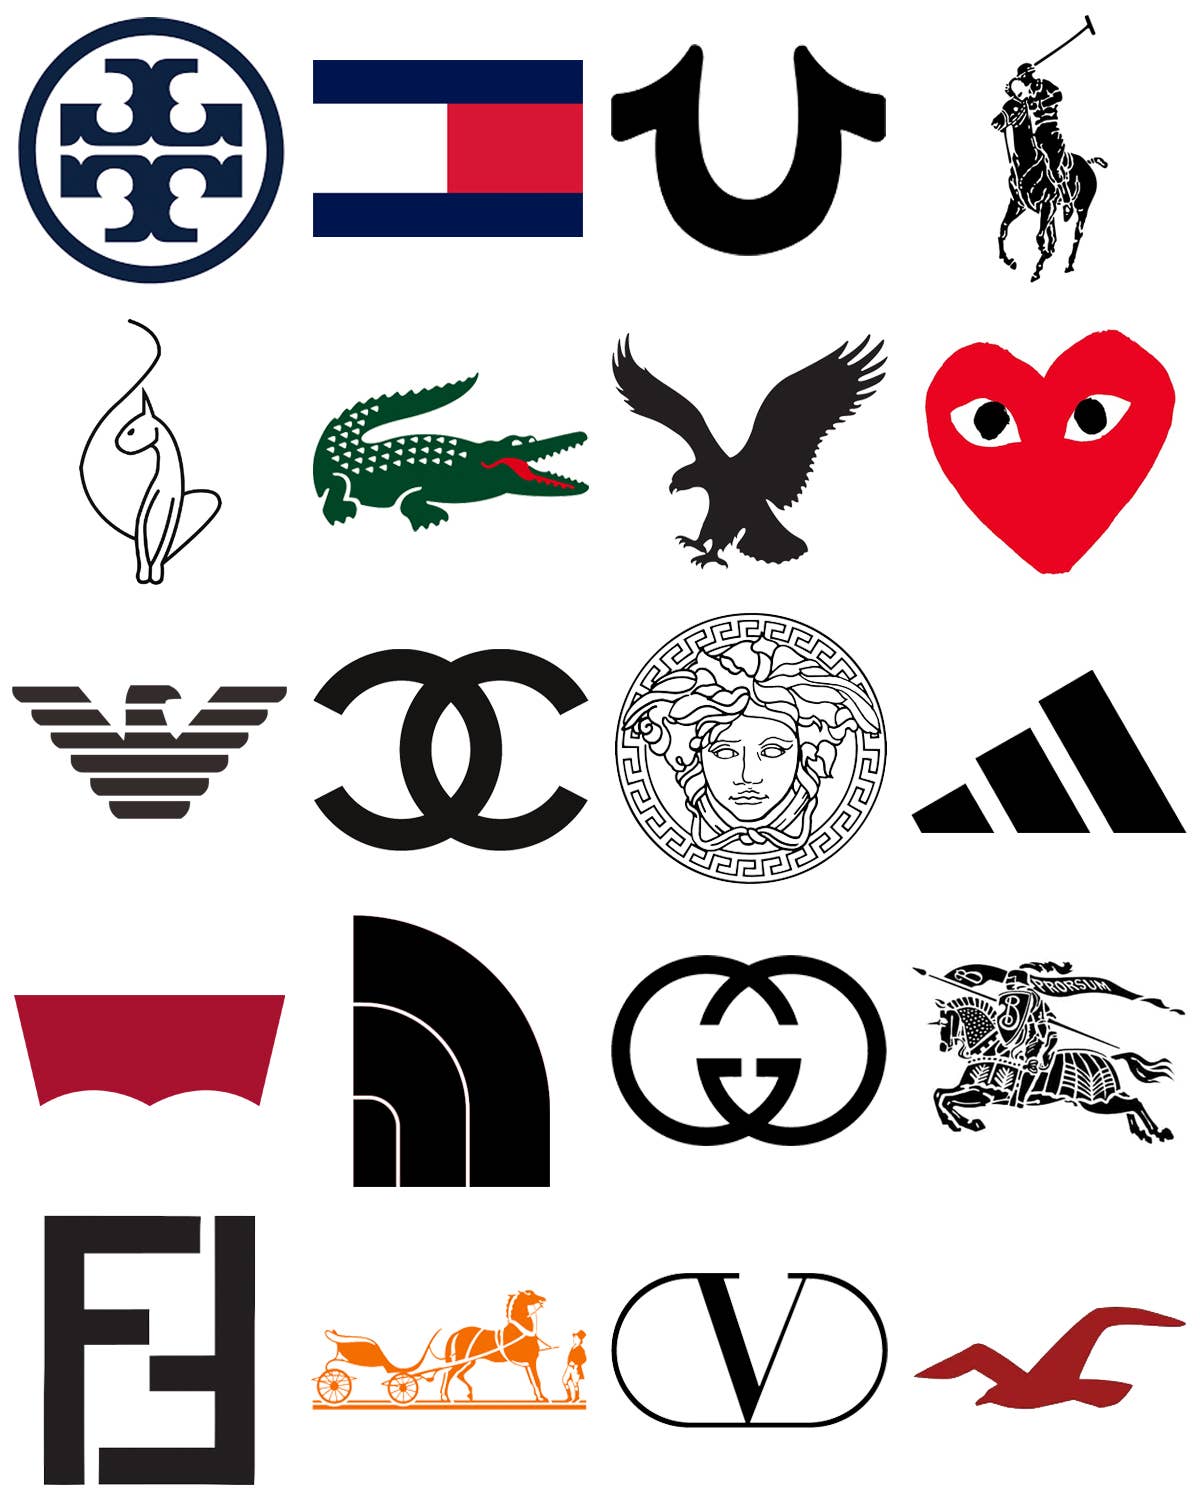 How Well Do You Logos?